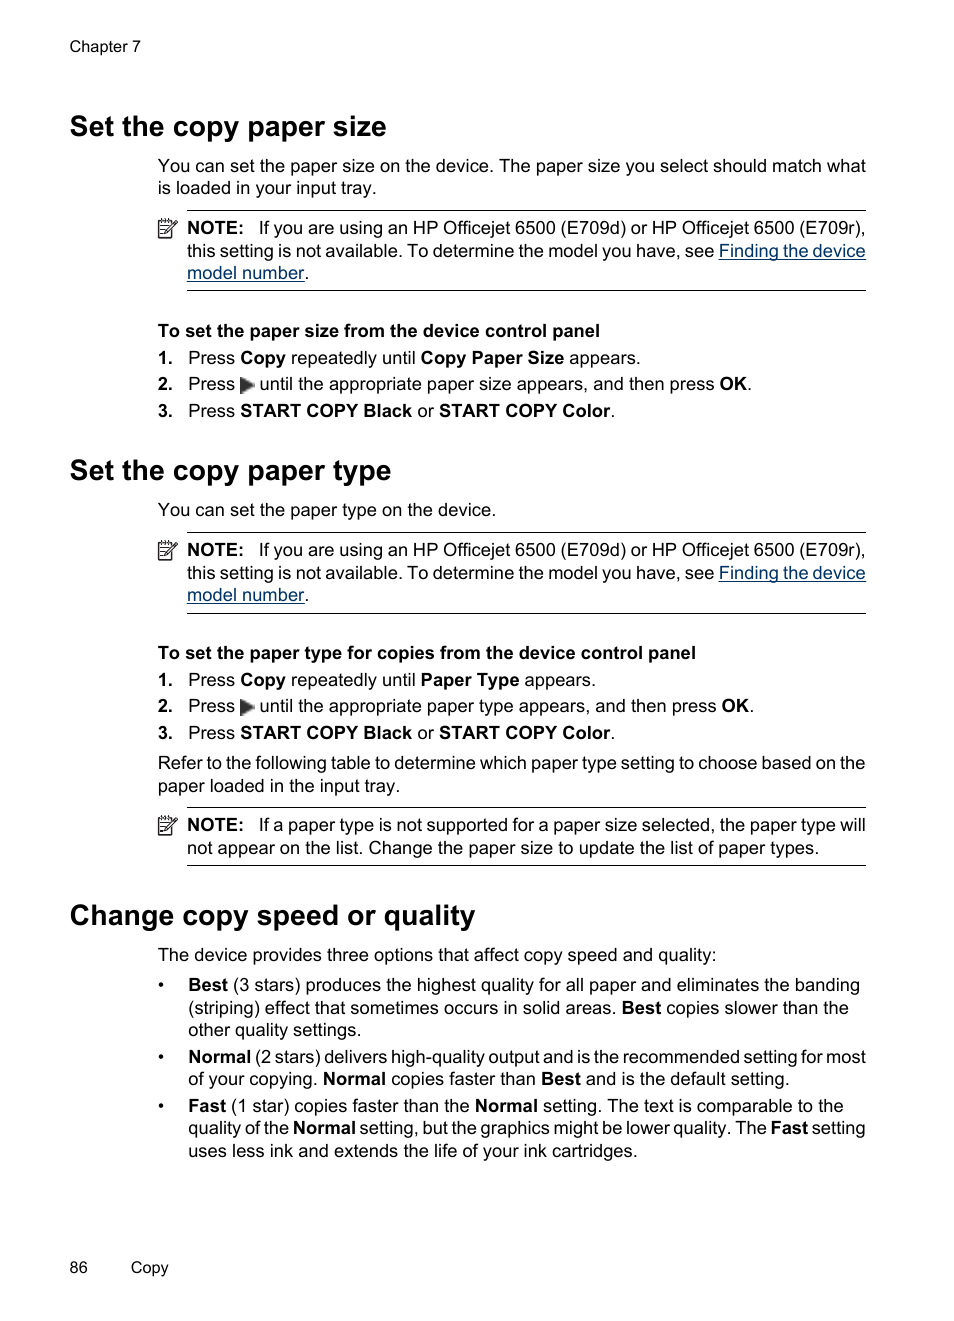 Set the copy paper size, Set the copy paper type, Change copy speed or quality | HP Officejet 6500 User Manual | Page 90 / 294